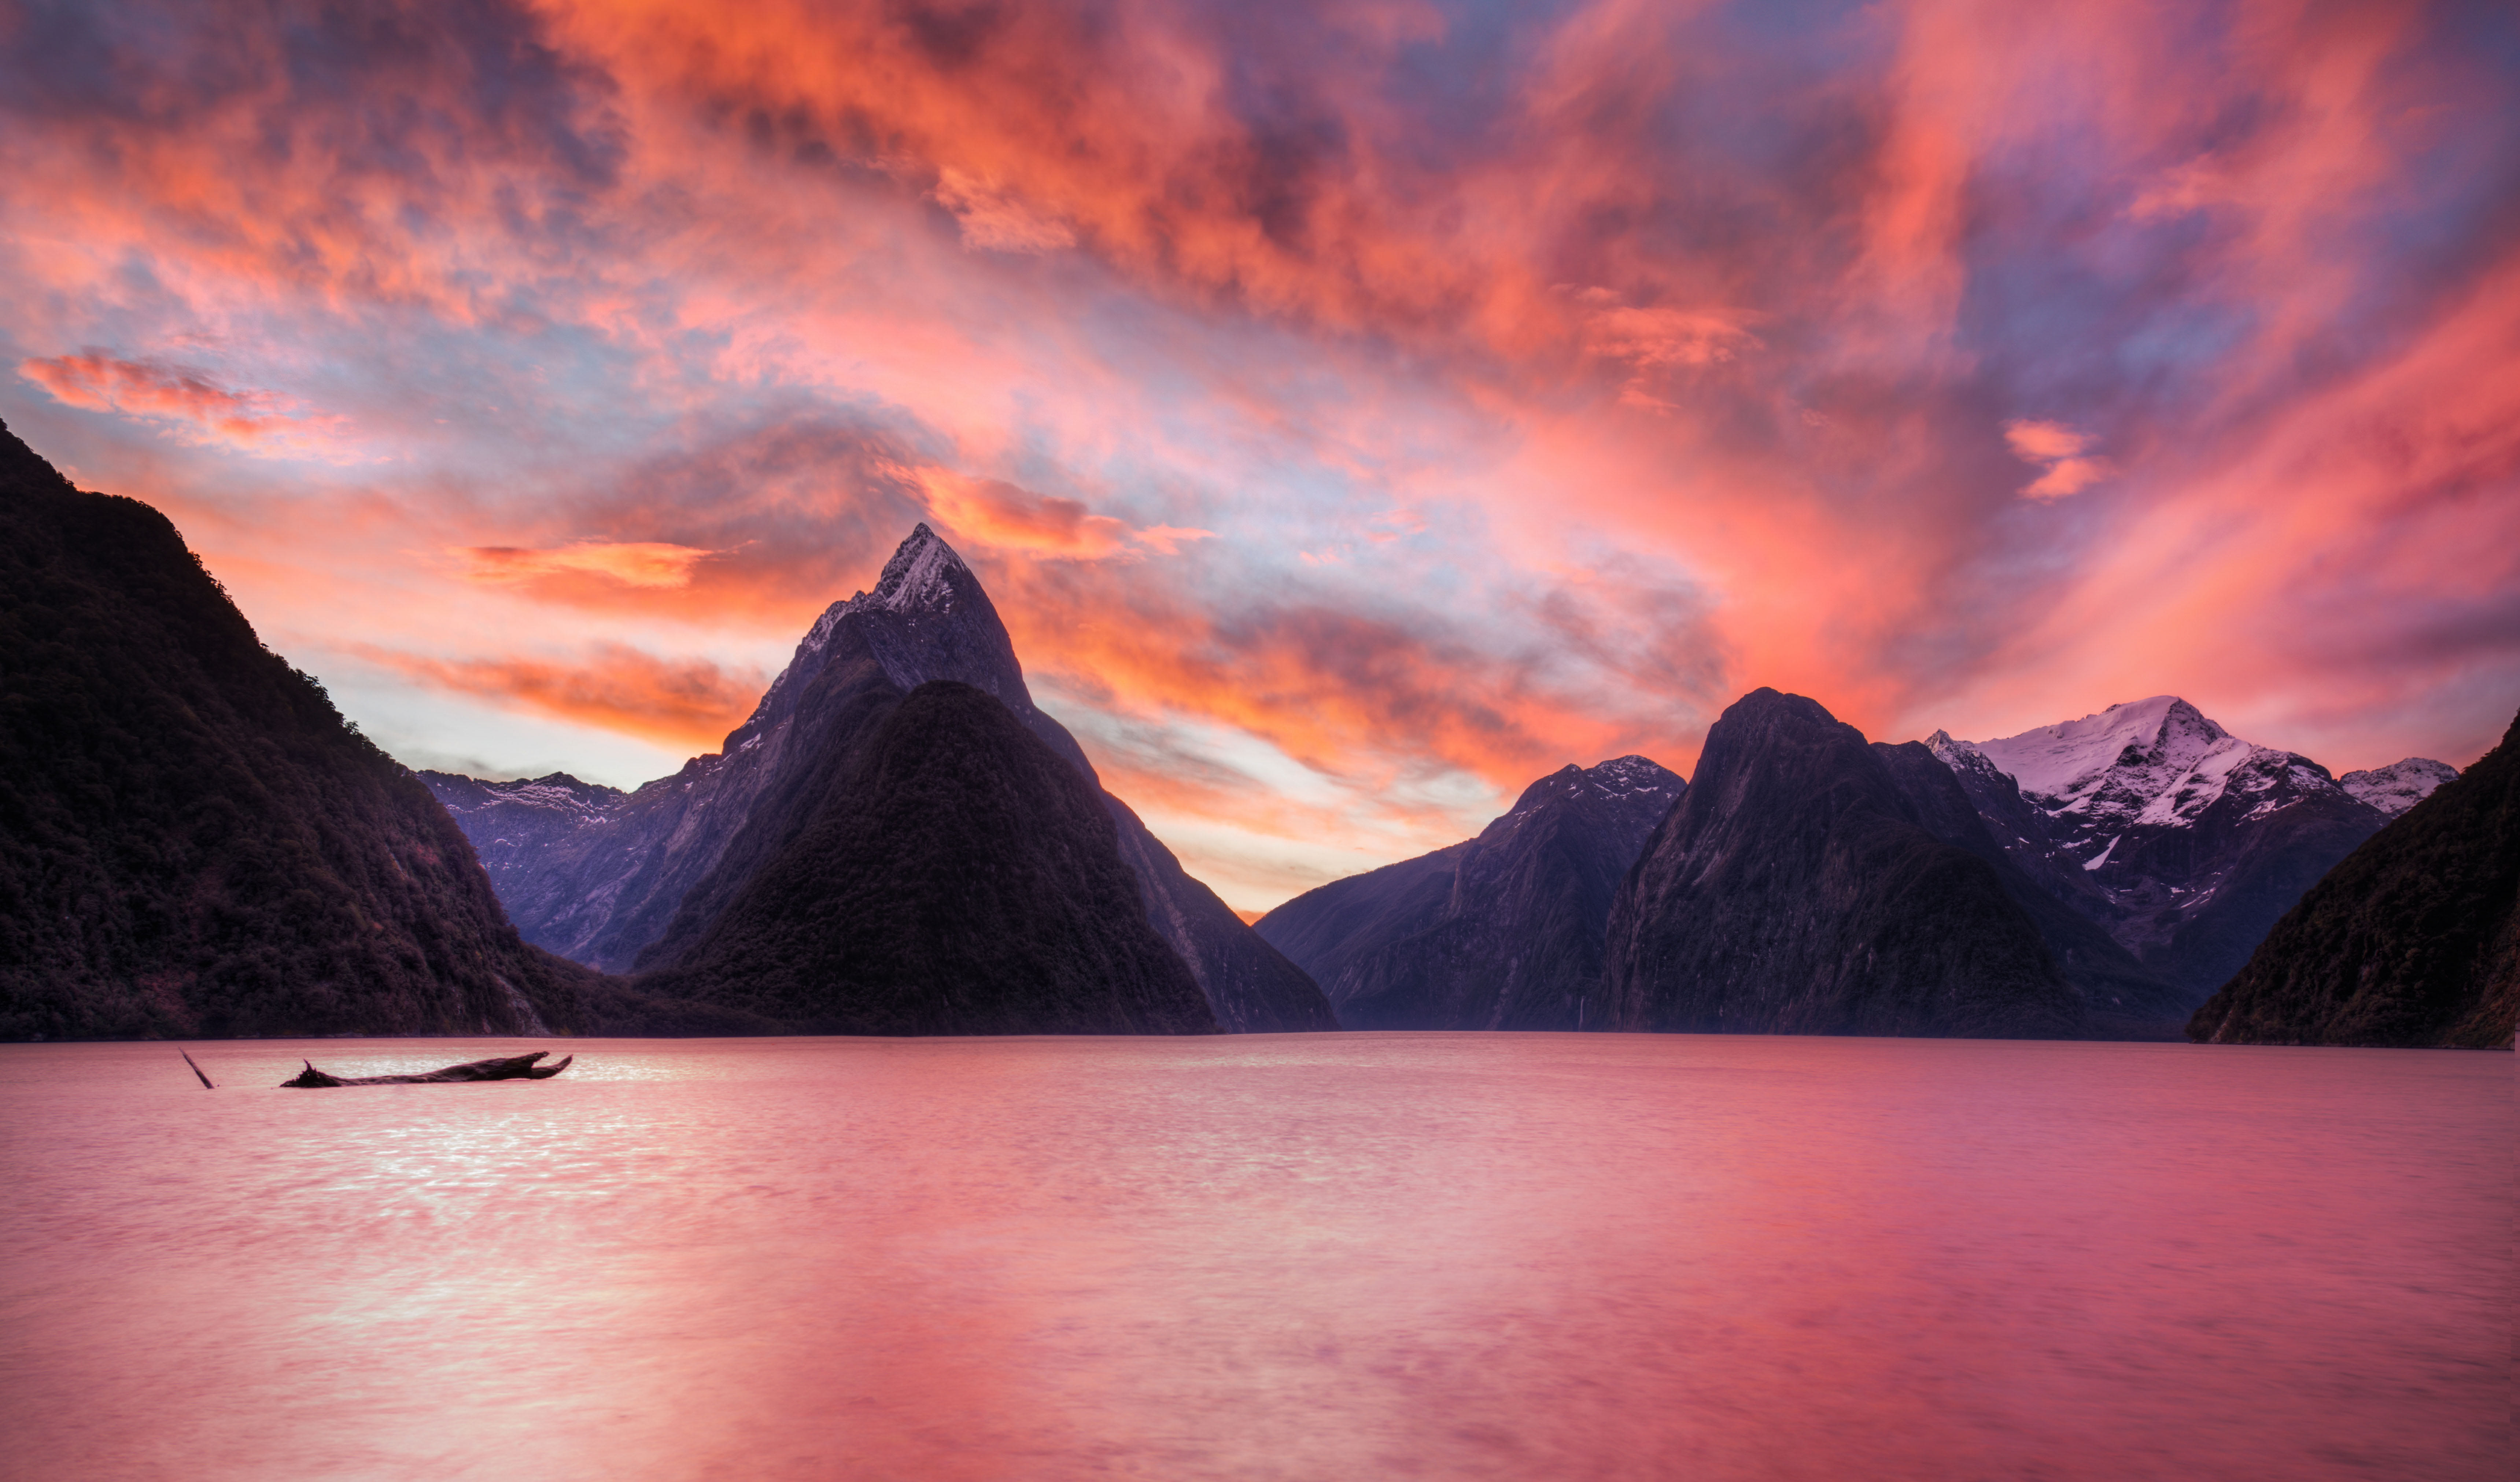 Milford Sound New Zealand HDR Pink Sunset Fjord National Park Landscape Nature Mountains Clouds Lake 6877x4044